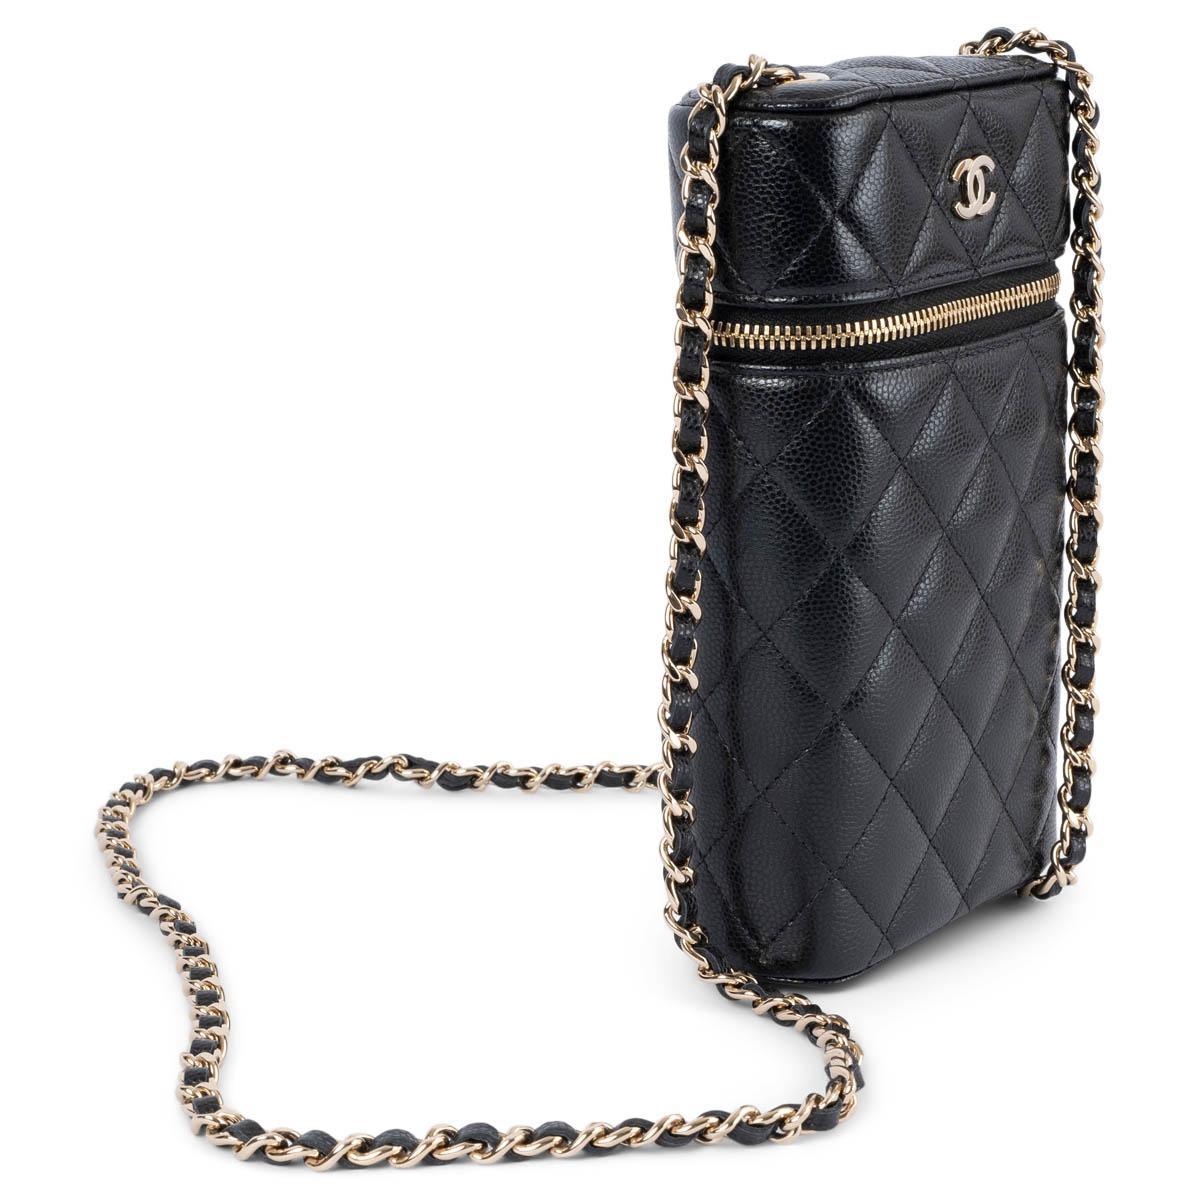 100% authentic Chanel 2022 Vanity phone holder in black quilted caviar calfskin featuring light gold-tone hardware. Opens with a zipper and is lined in burgundy grosgrain. Has been carried once or twice and is in virtually new condition. Comes with